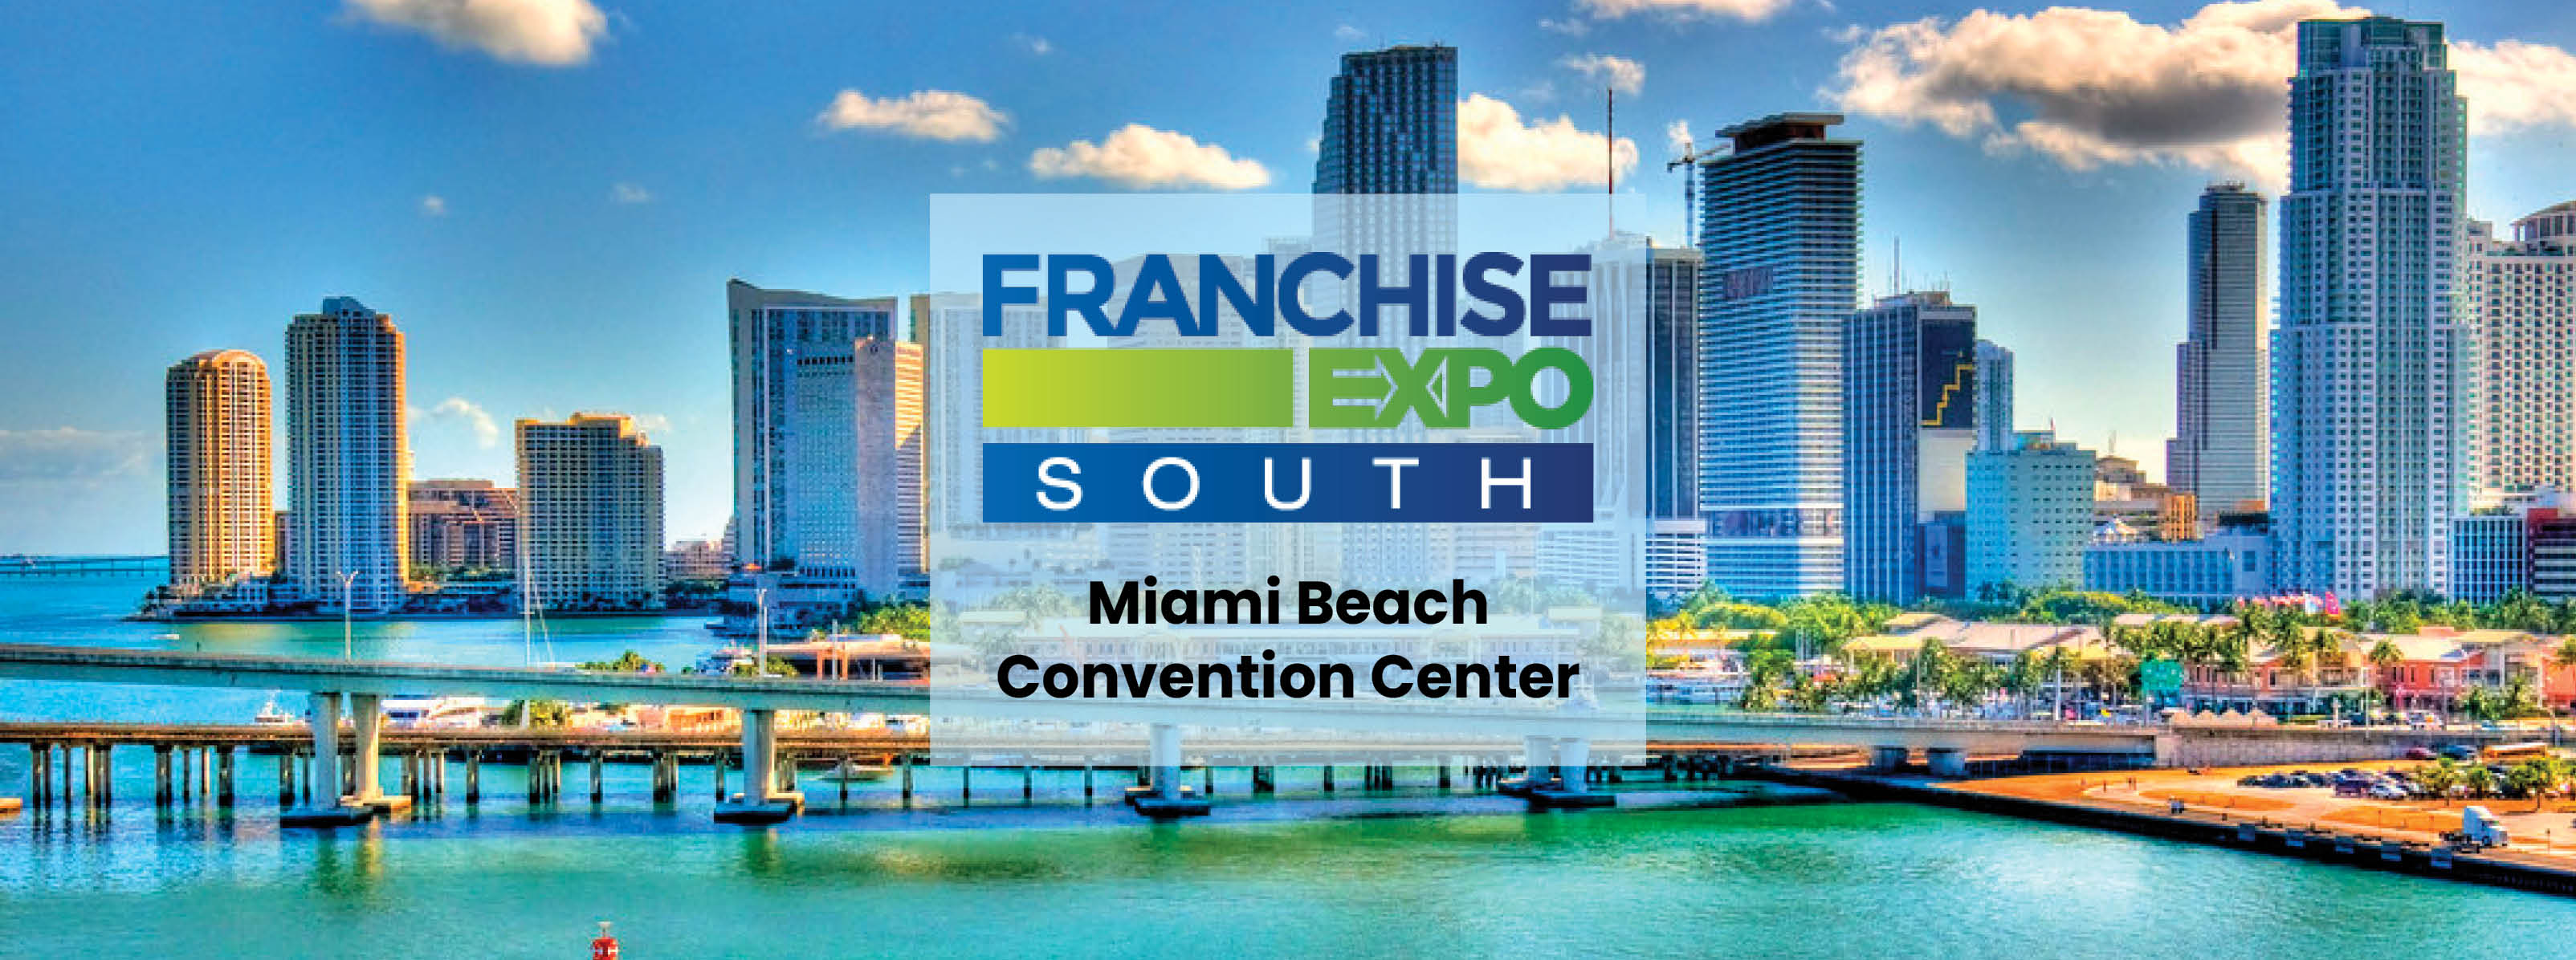 Franchise Expo and Shows